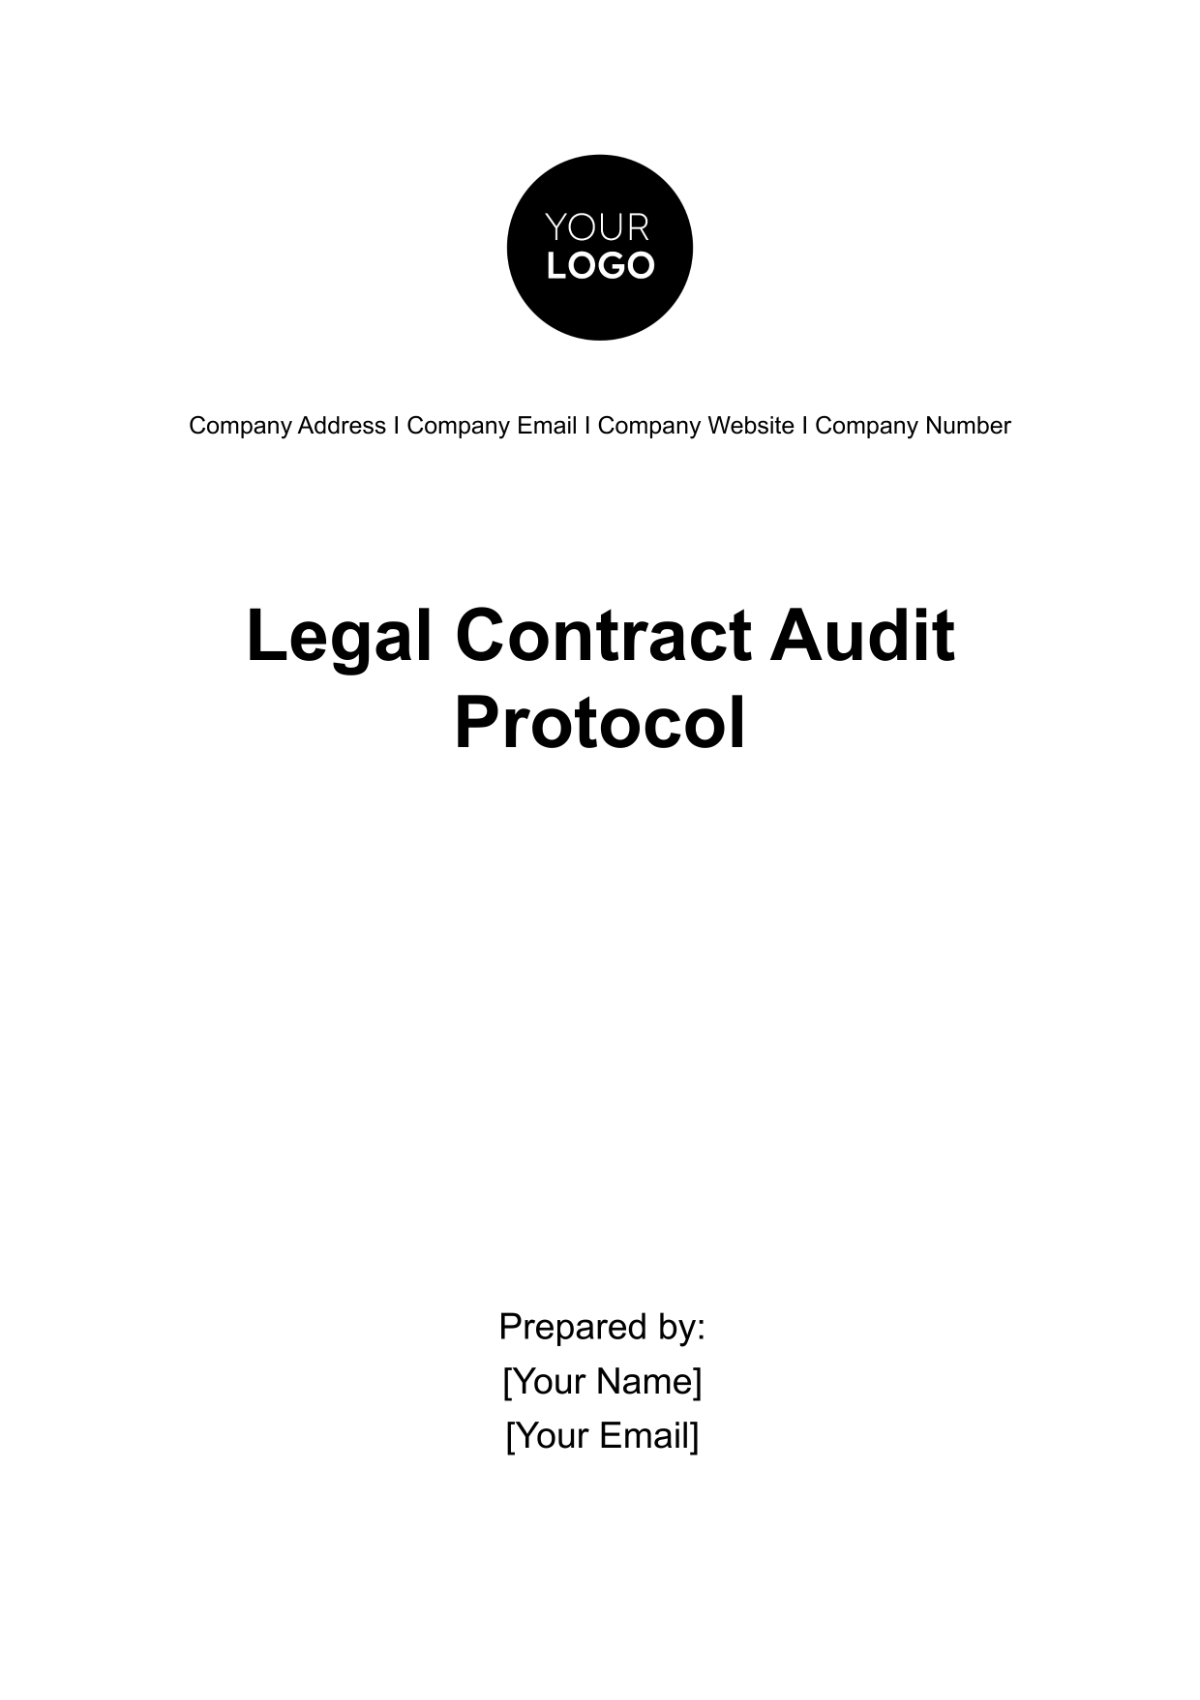 Legal Contract Audit Protocol Template